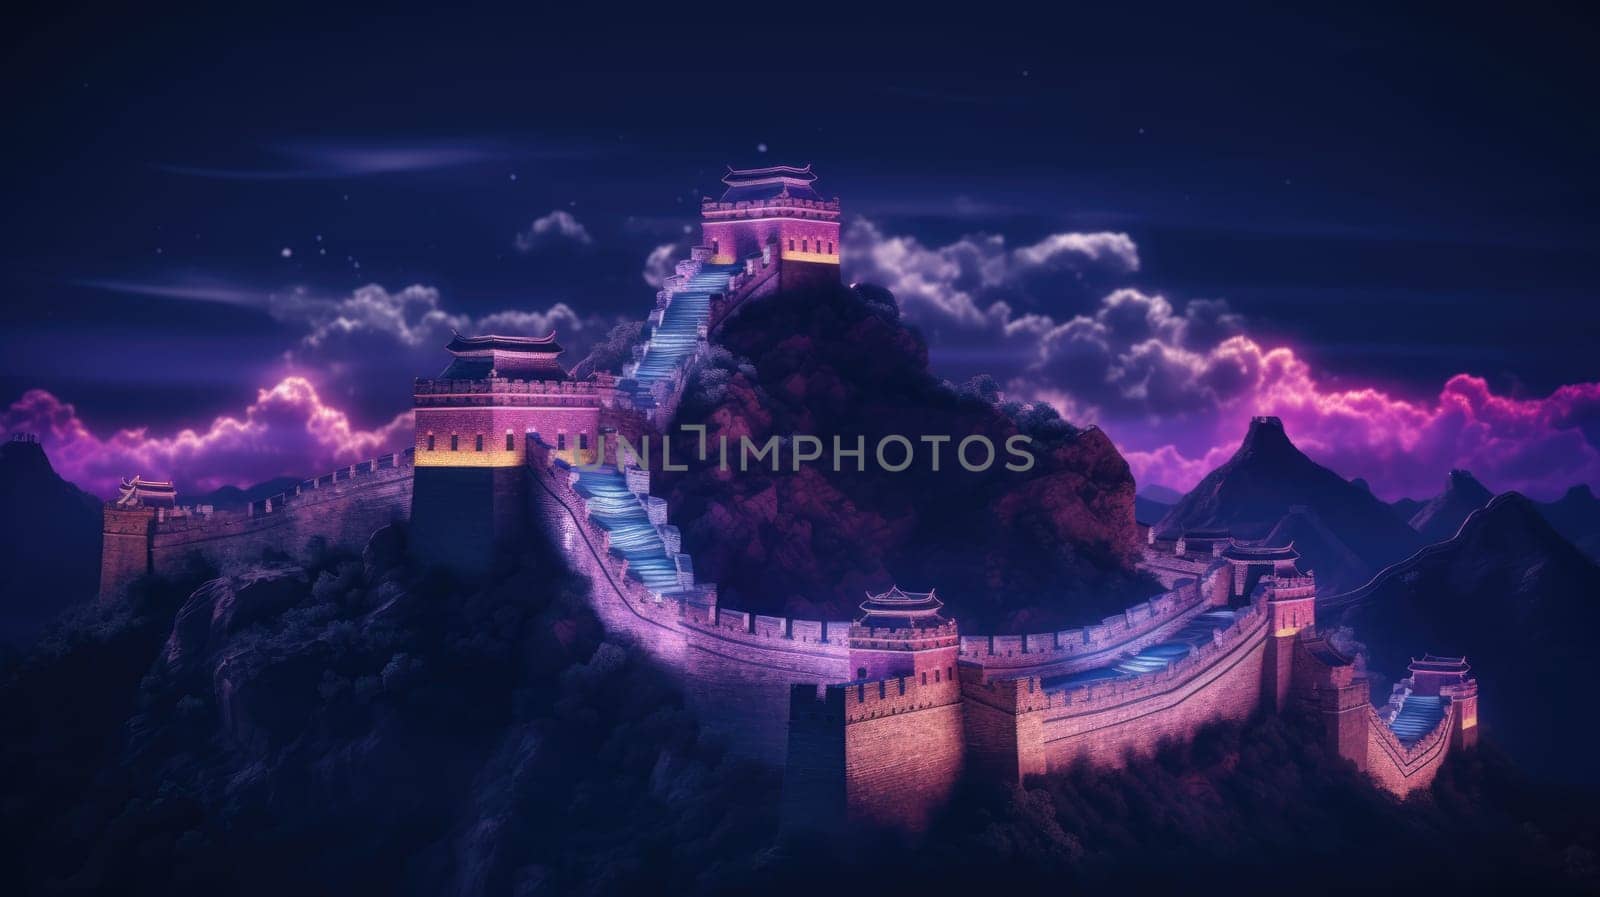 The great wall of China under a purple sky lit up in pink and purple neon lights at night by JuliaDorian